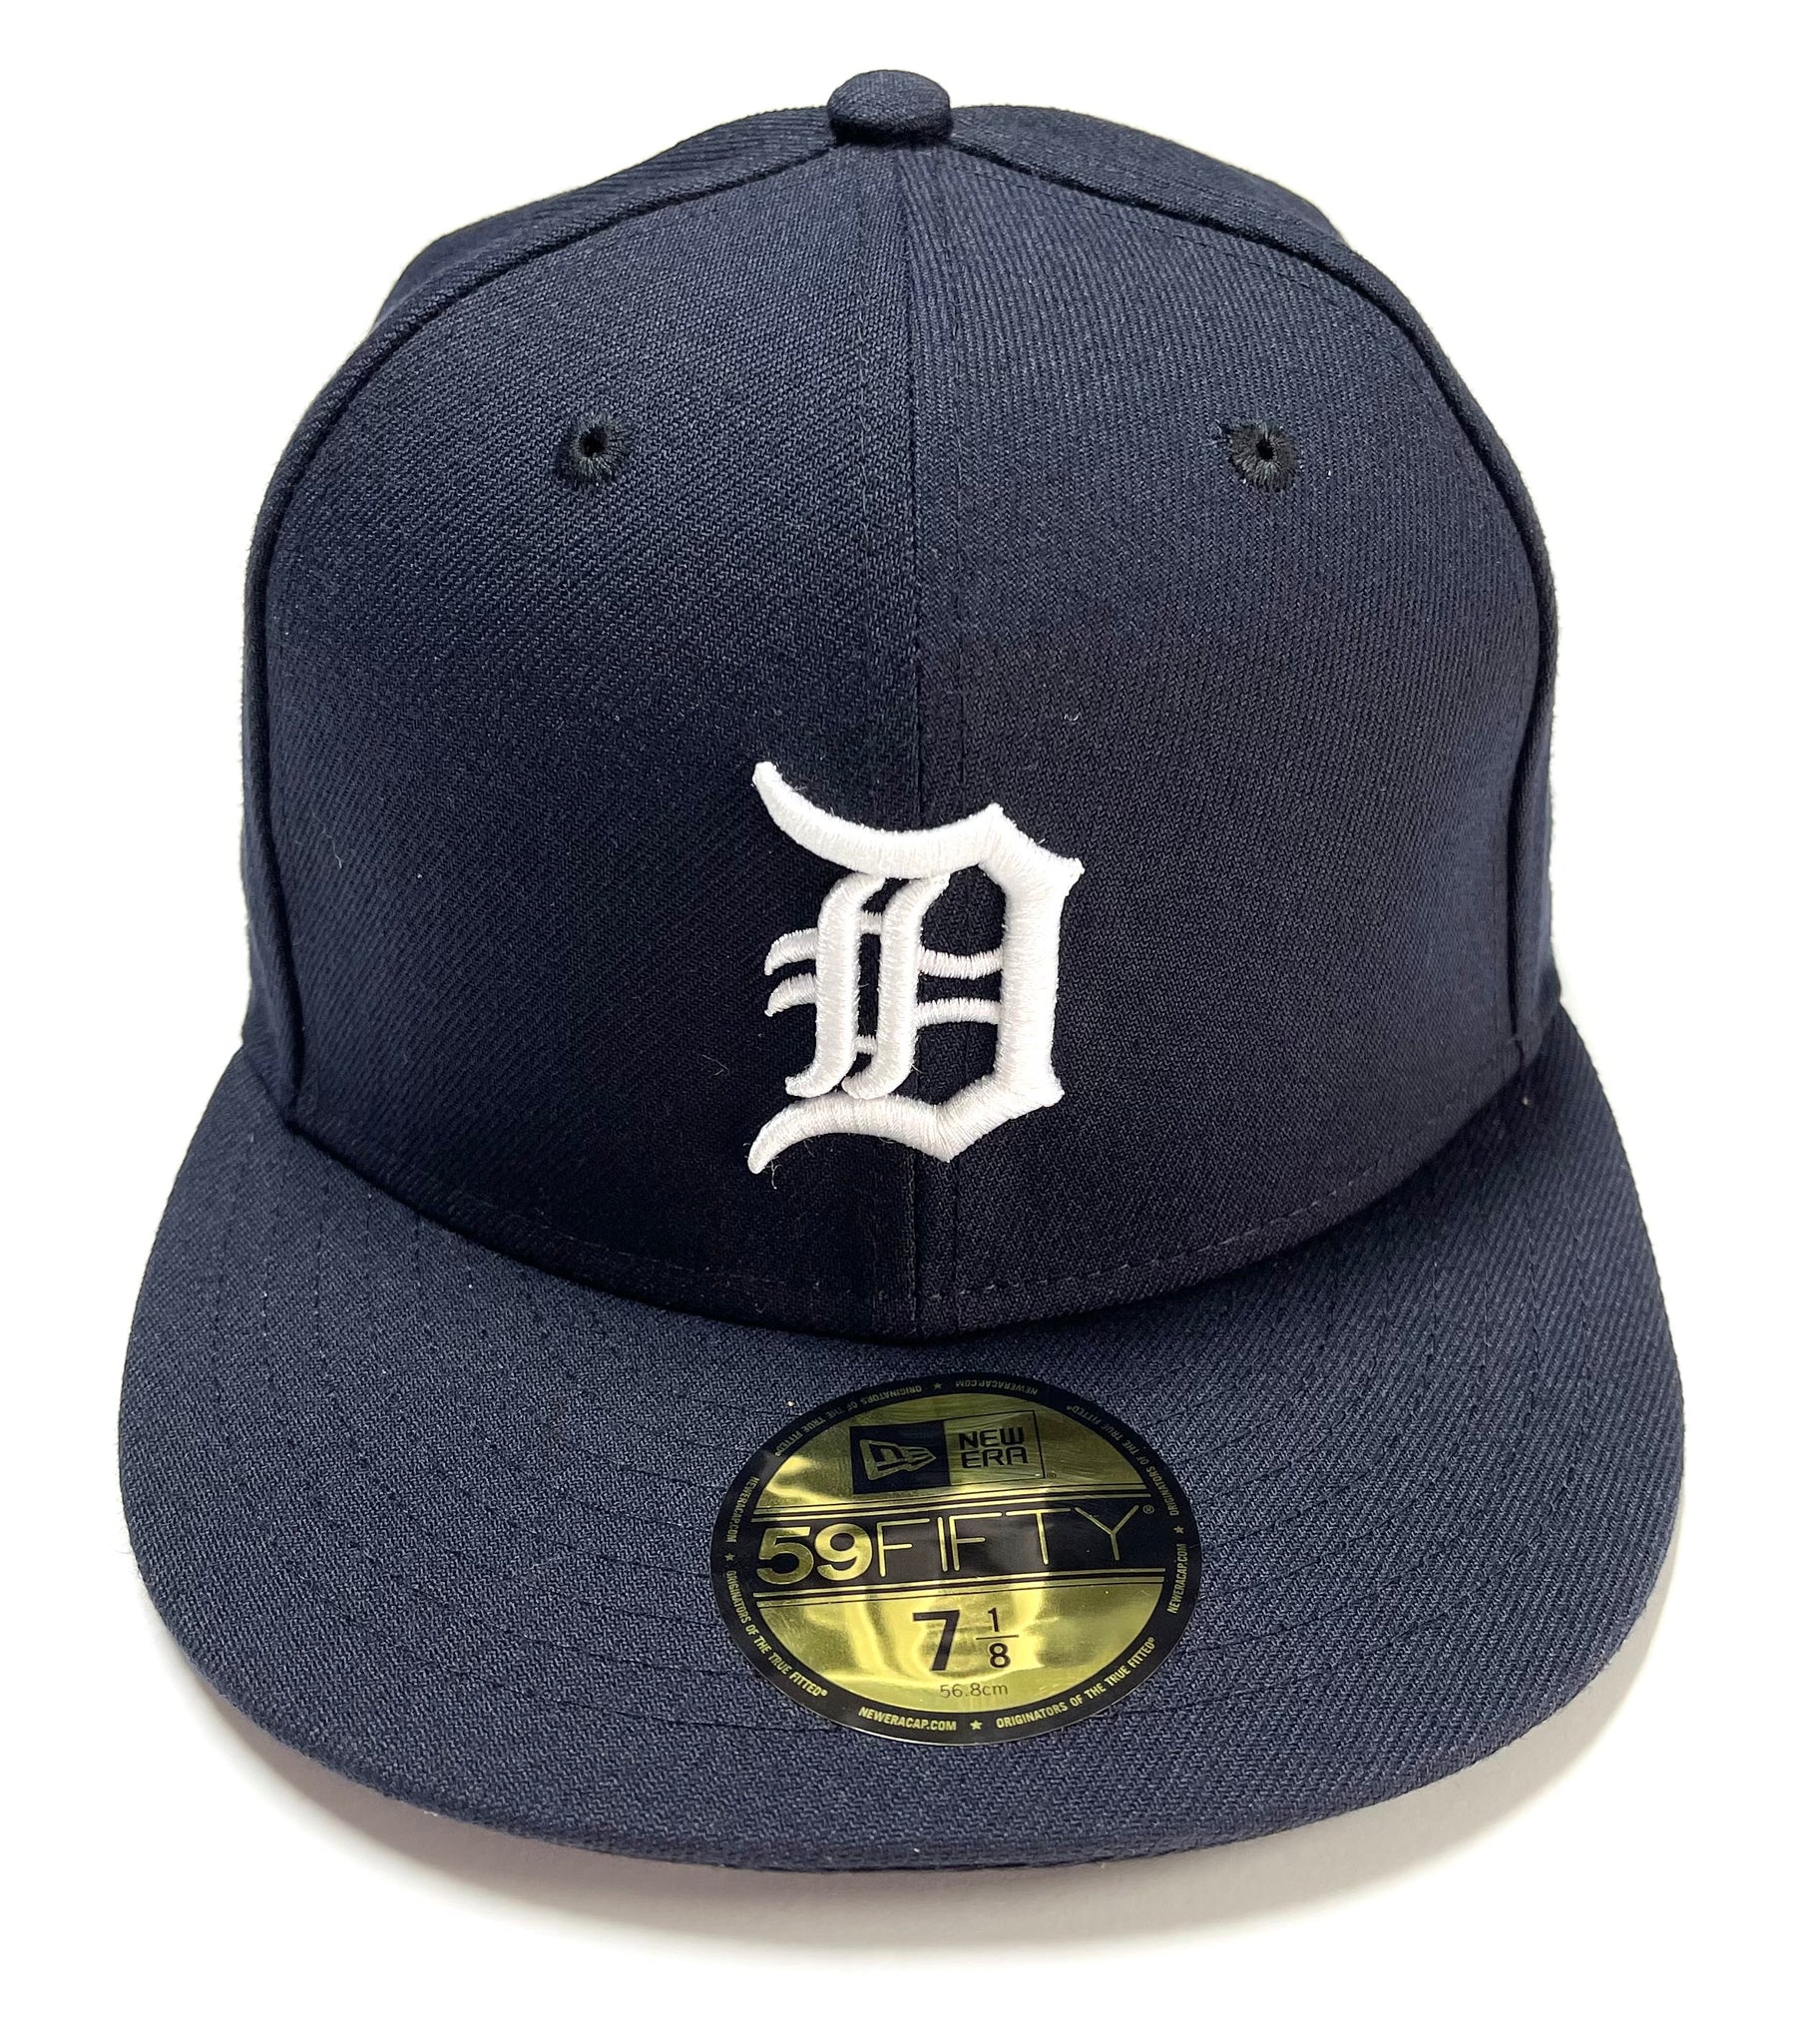 tigers fitted hat